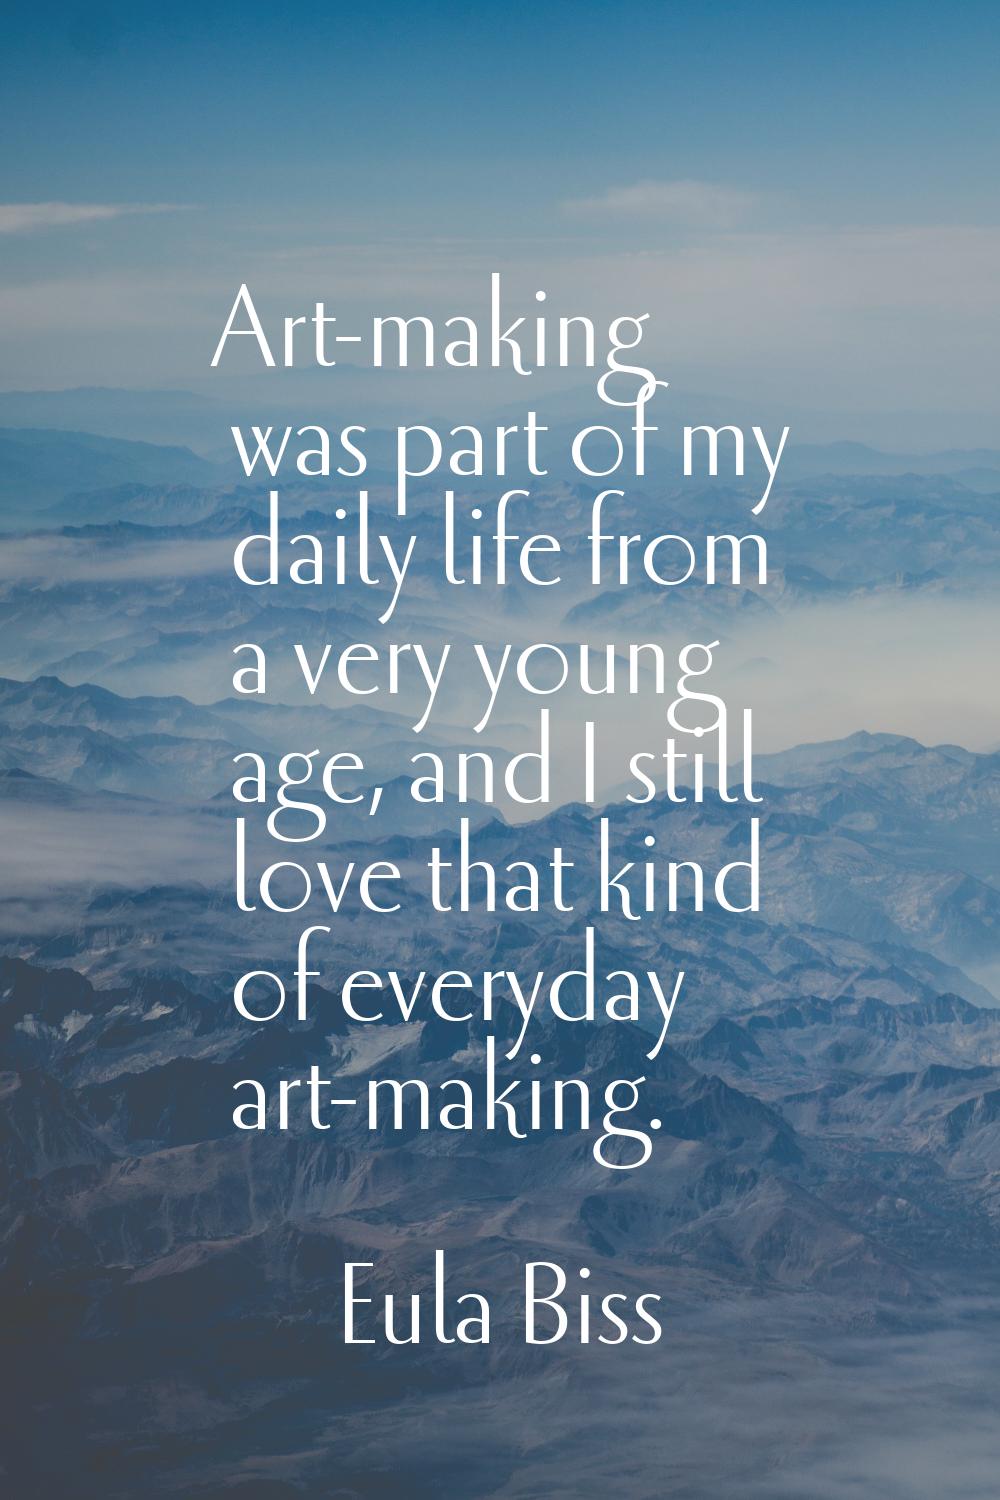 Art-making was part of my daily life from a very young age, and I still love that kind of everyday 